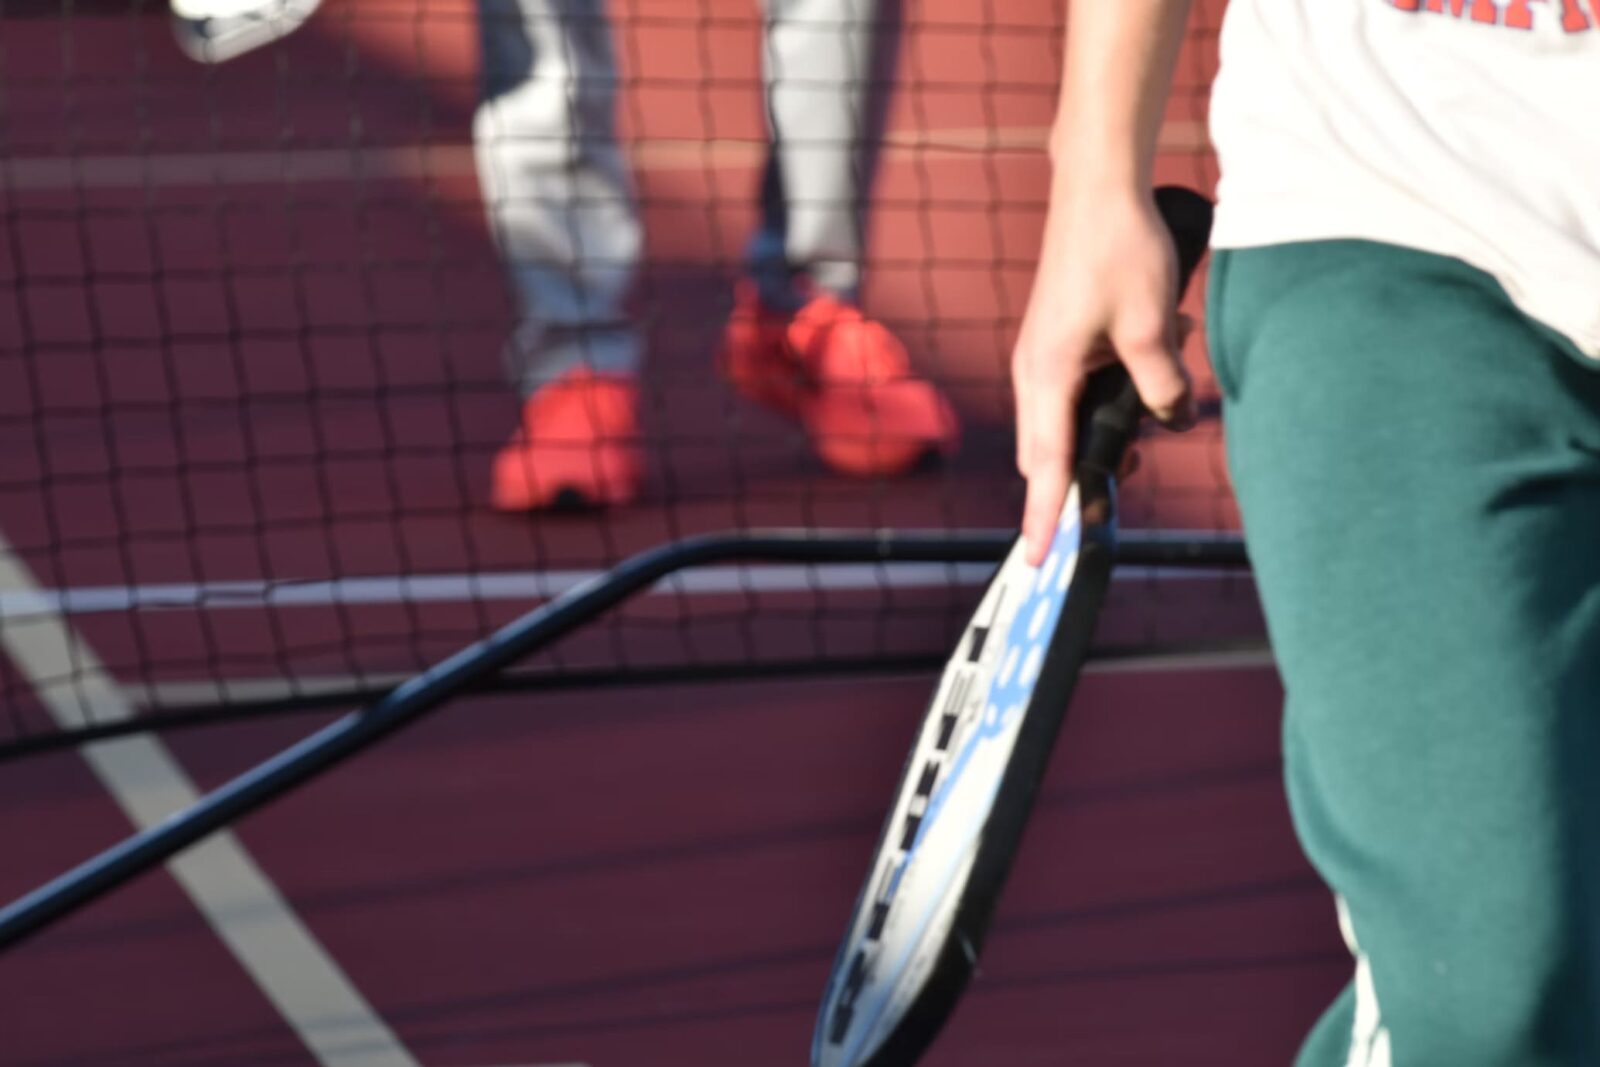 Top 5 locations for enthusiasts to play Pickleball in Arizona